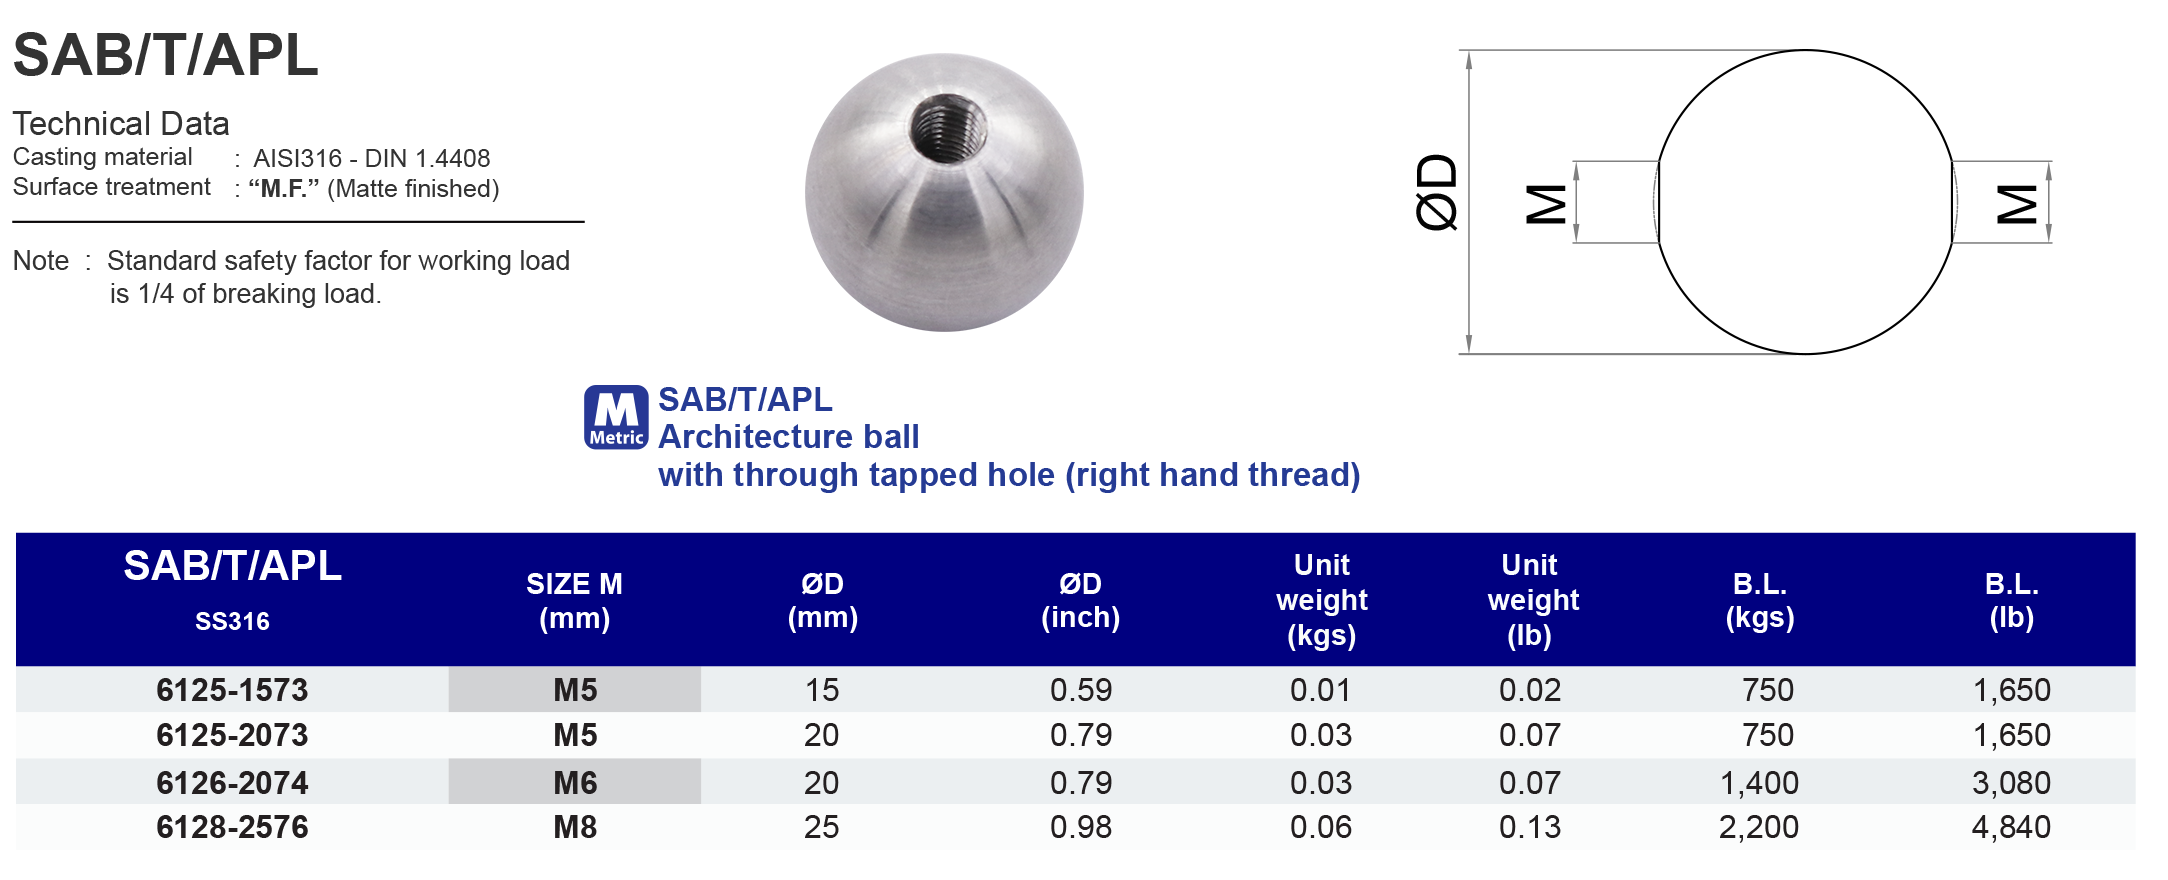 SAB/T/APL Architecture ball with through tapped hole (right hand thread) - 316